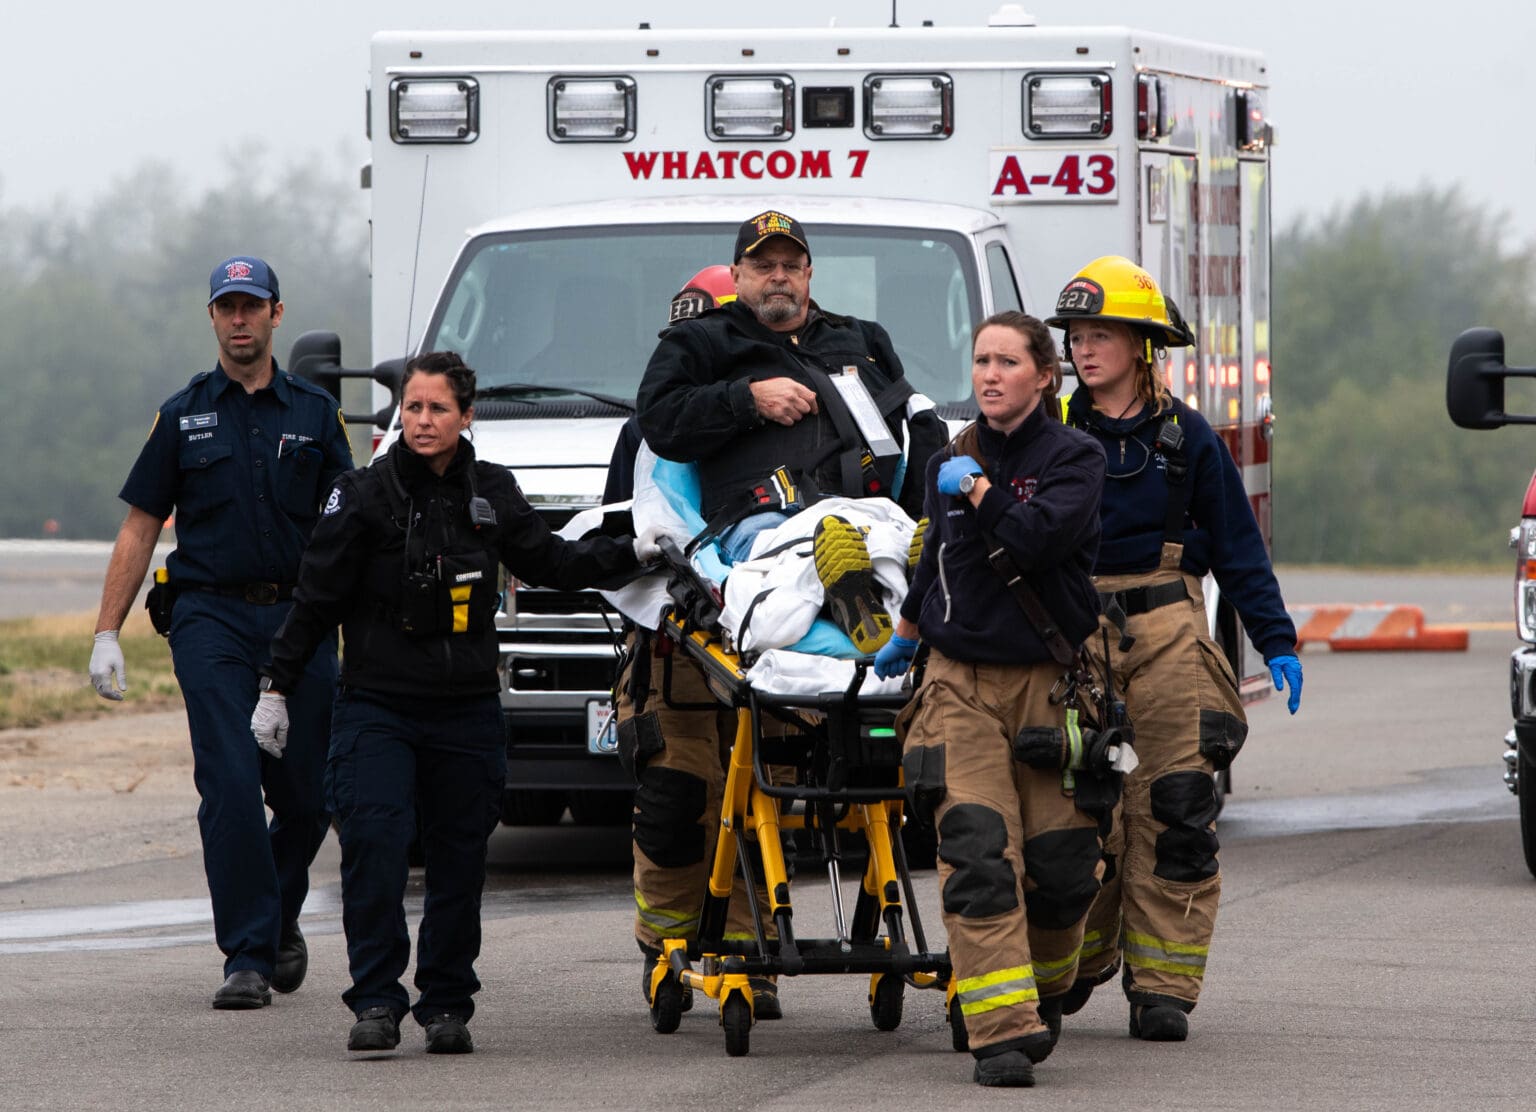 A volunteer victim on a stretcher gets escorted by multiple firemen in training away from the ambulance.